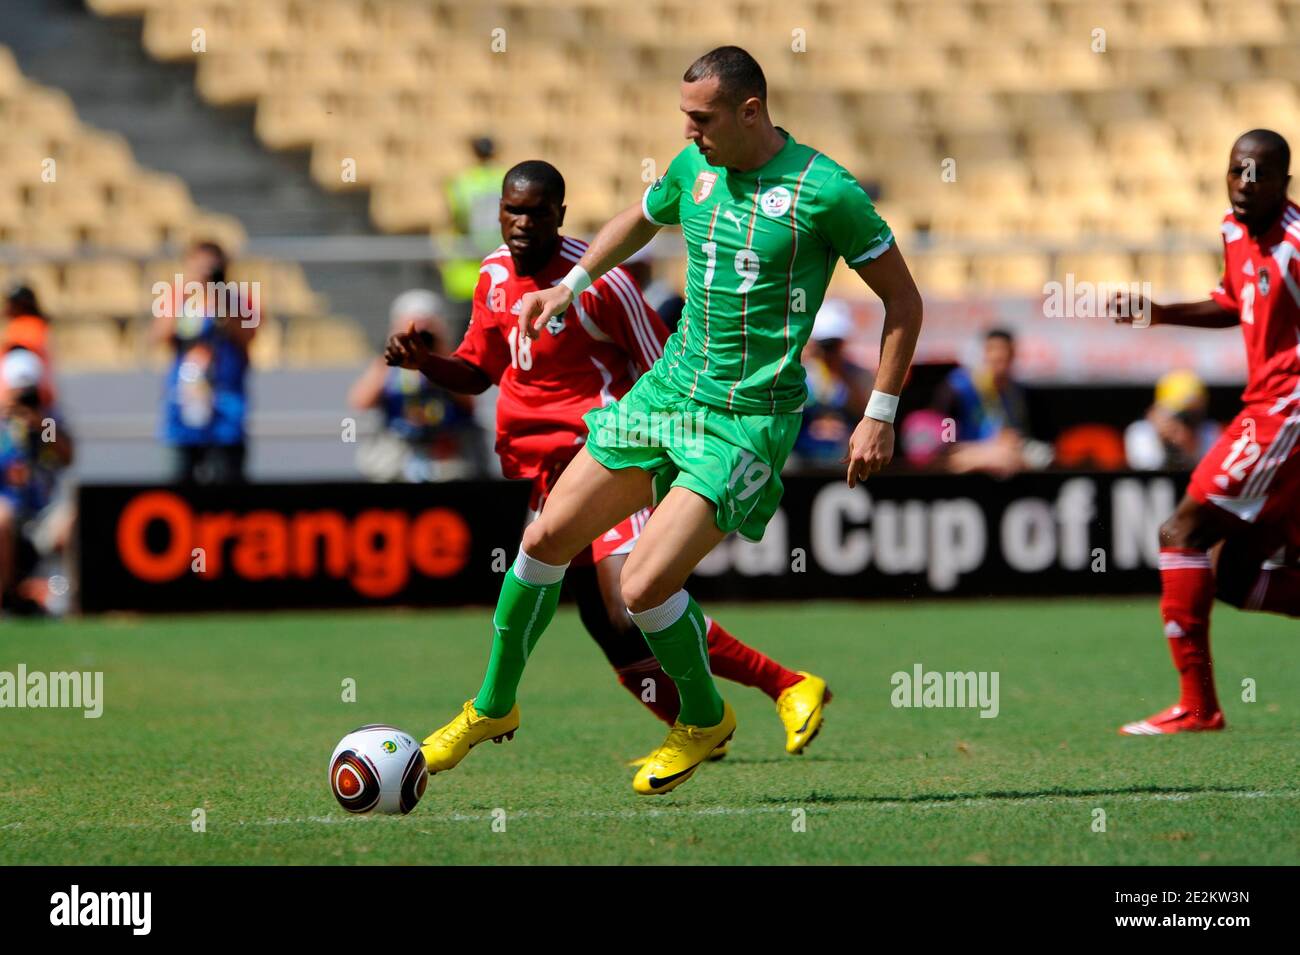 Algeria's Hassan Yebda during the African Soccer Cup of Nations Soccer match, Group A, Algeria vs Malawi in Luanda, Angola on January 11, 2010. Malawi won 3-0. Photo by RainbowPress/Cameleon/ABACAPRESS.COM Stock Photo